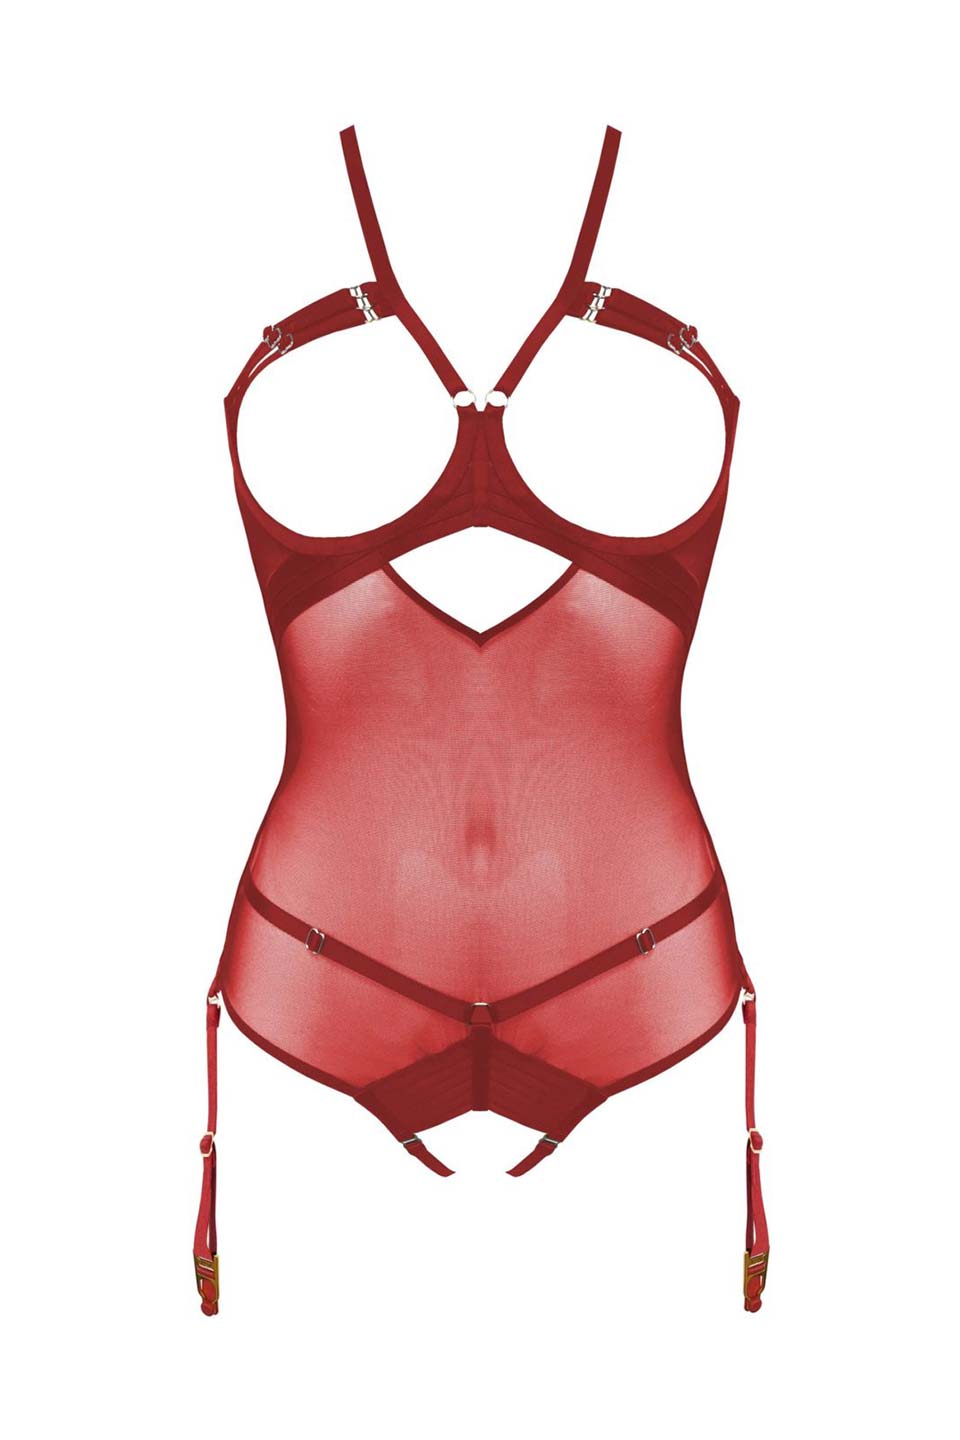 Atelier Bordelle designer body in red color front view. Product gallery 1